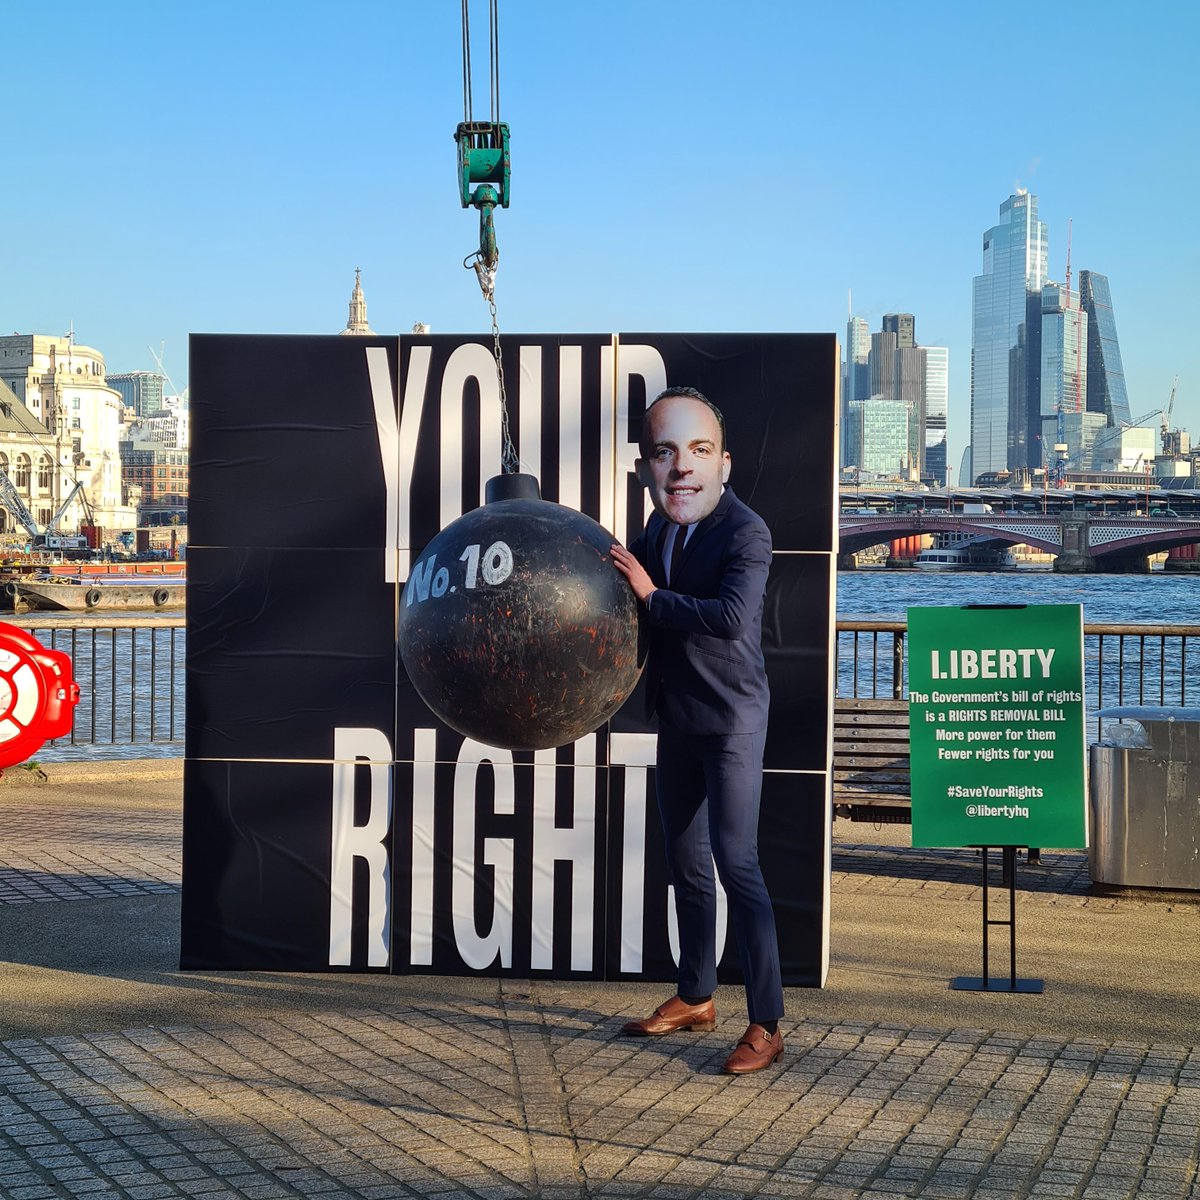 The Government is swinging a wrecking ball at your basic human rights

The #RightsRemovalBill means more power for them, fewer rights for you

Speak up to #SaveYourRights. Sign the petition: action.libertyhumanrights.org.uk/page/100020/pe…